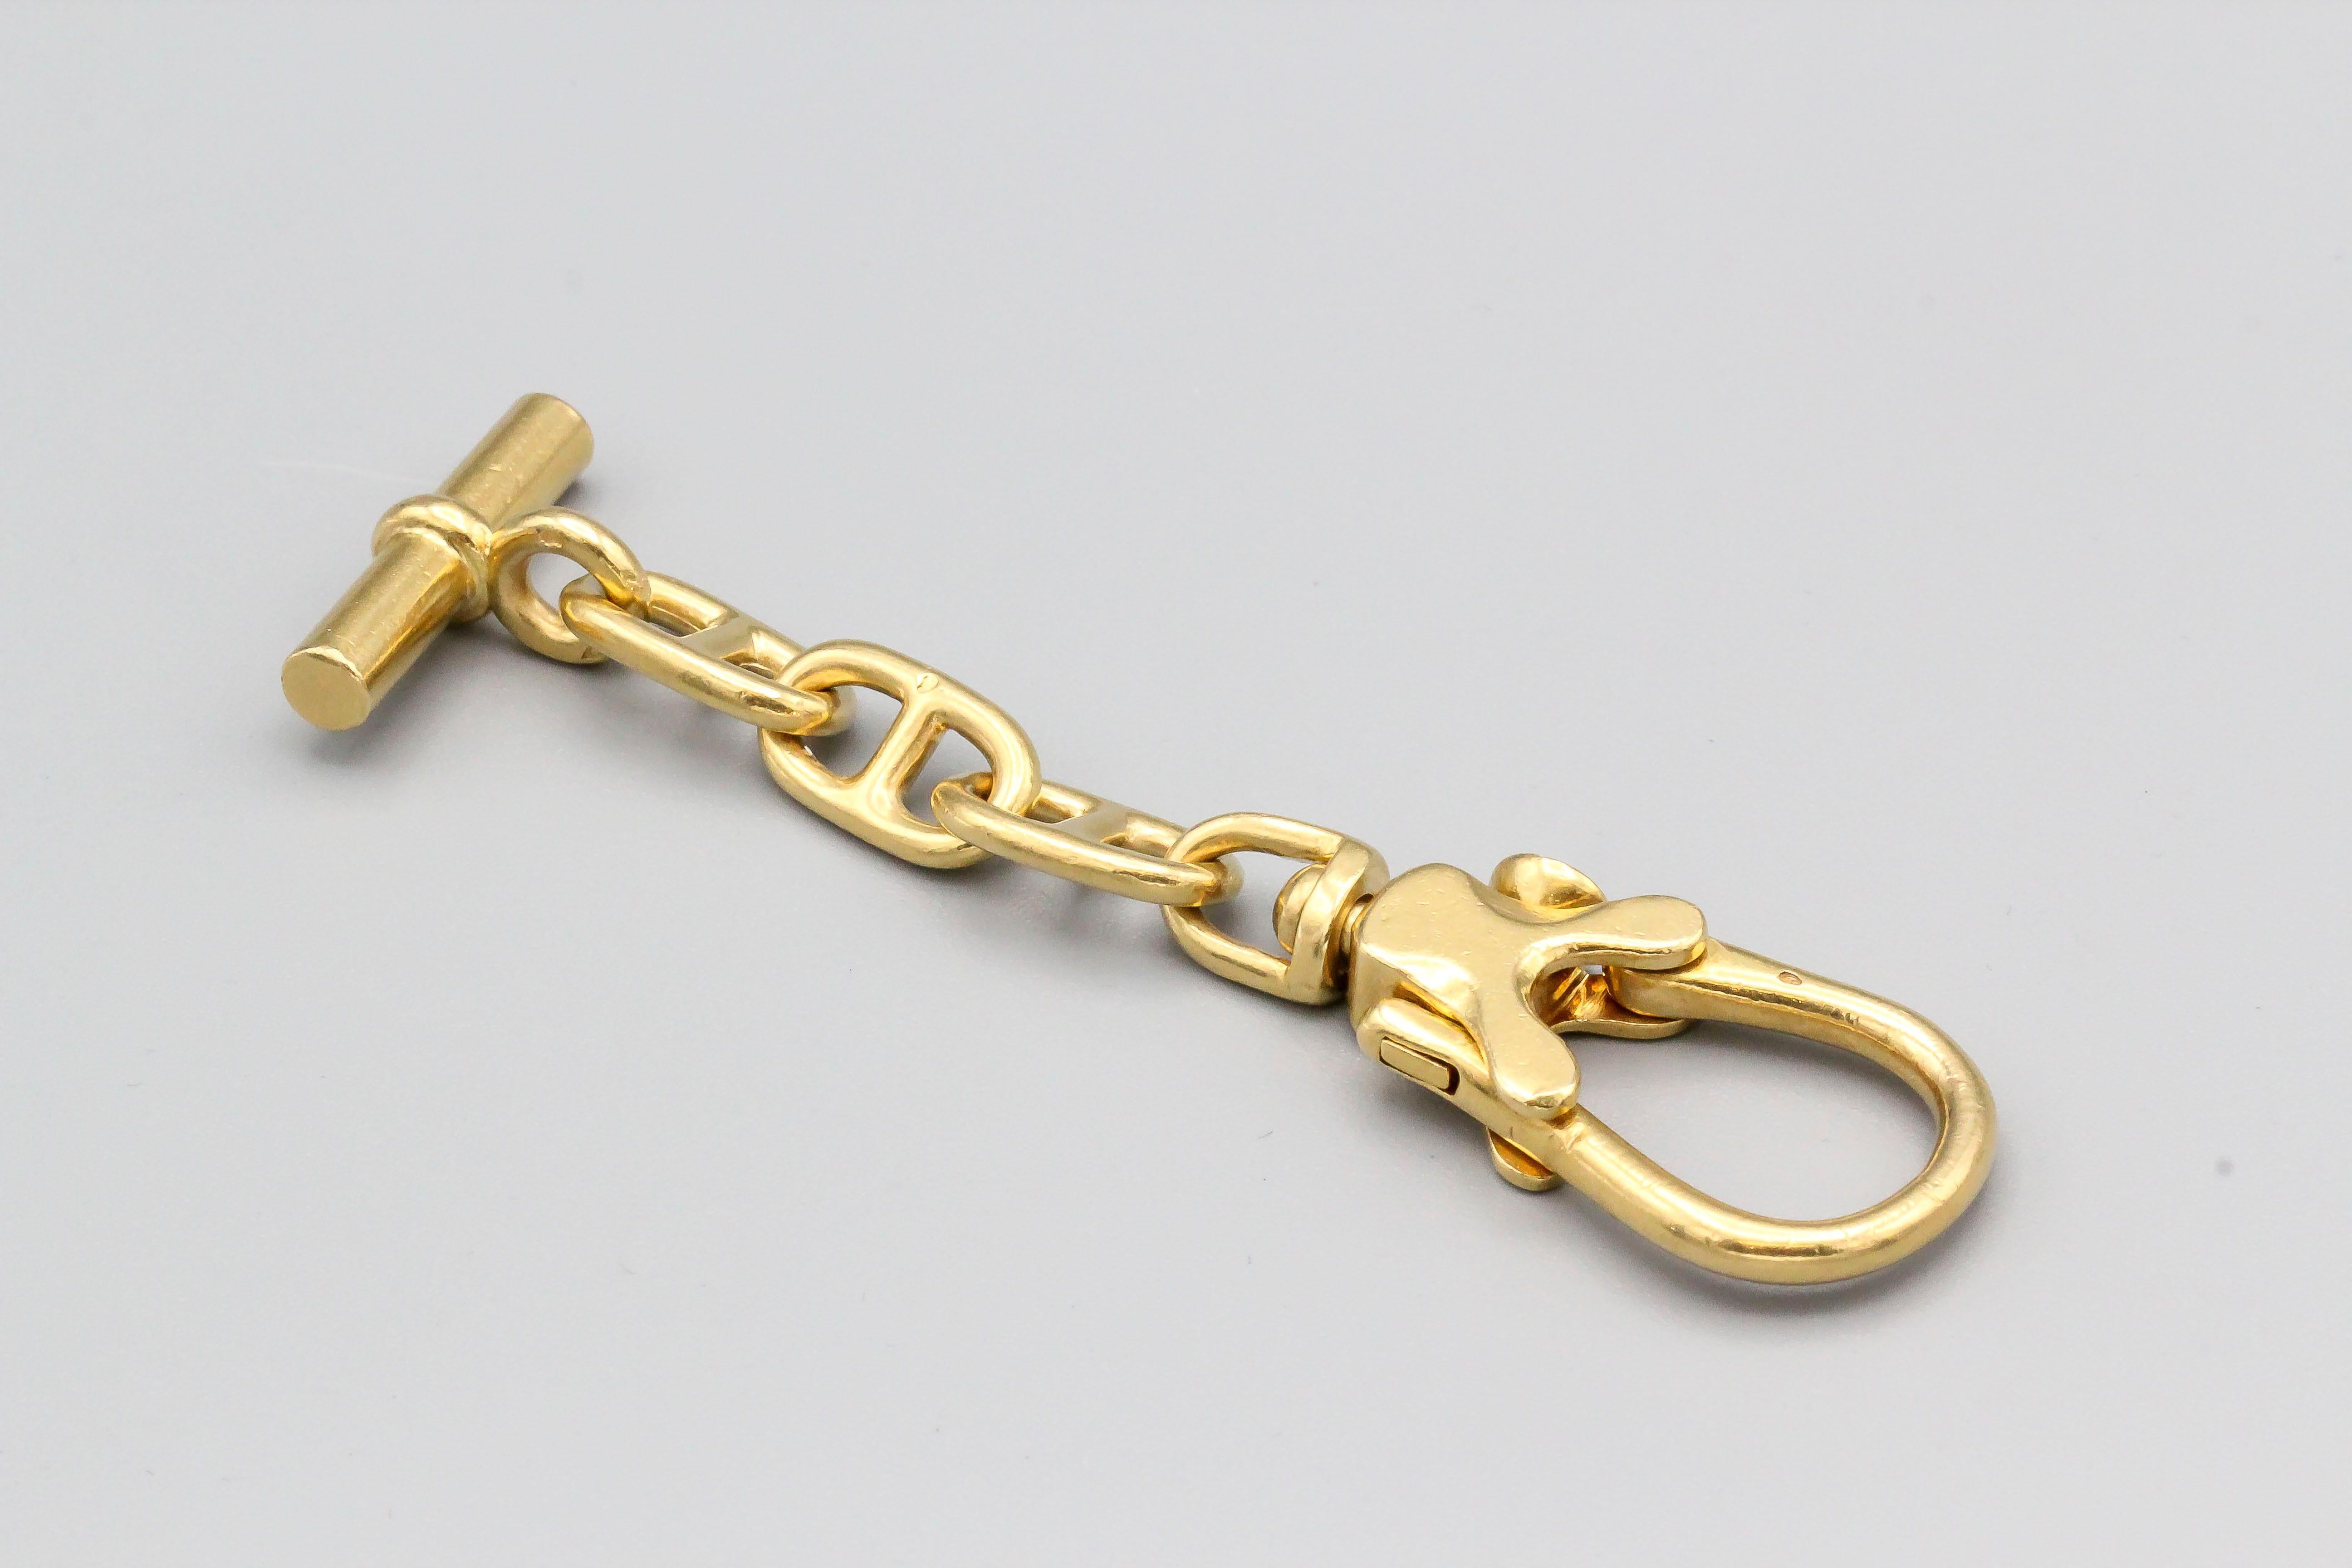 Classic Hermes 18k gold toggle link keychain, resembling the Chaine D'Ancre collection. Circa 1960s.

Hallmarks: Hermes, Paris, French 18k gold assay mark.